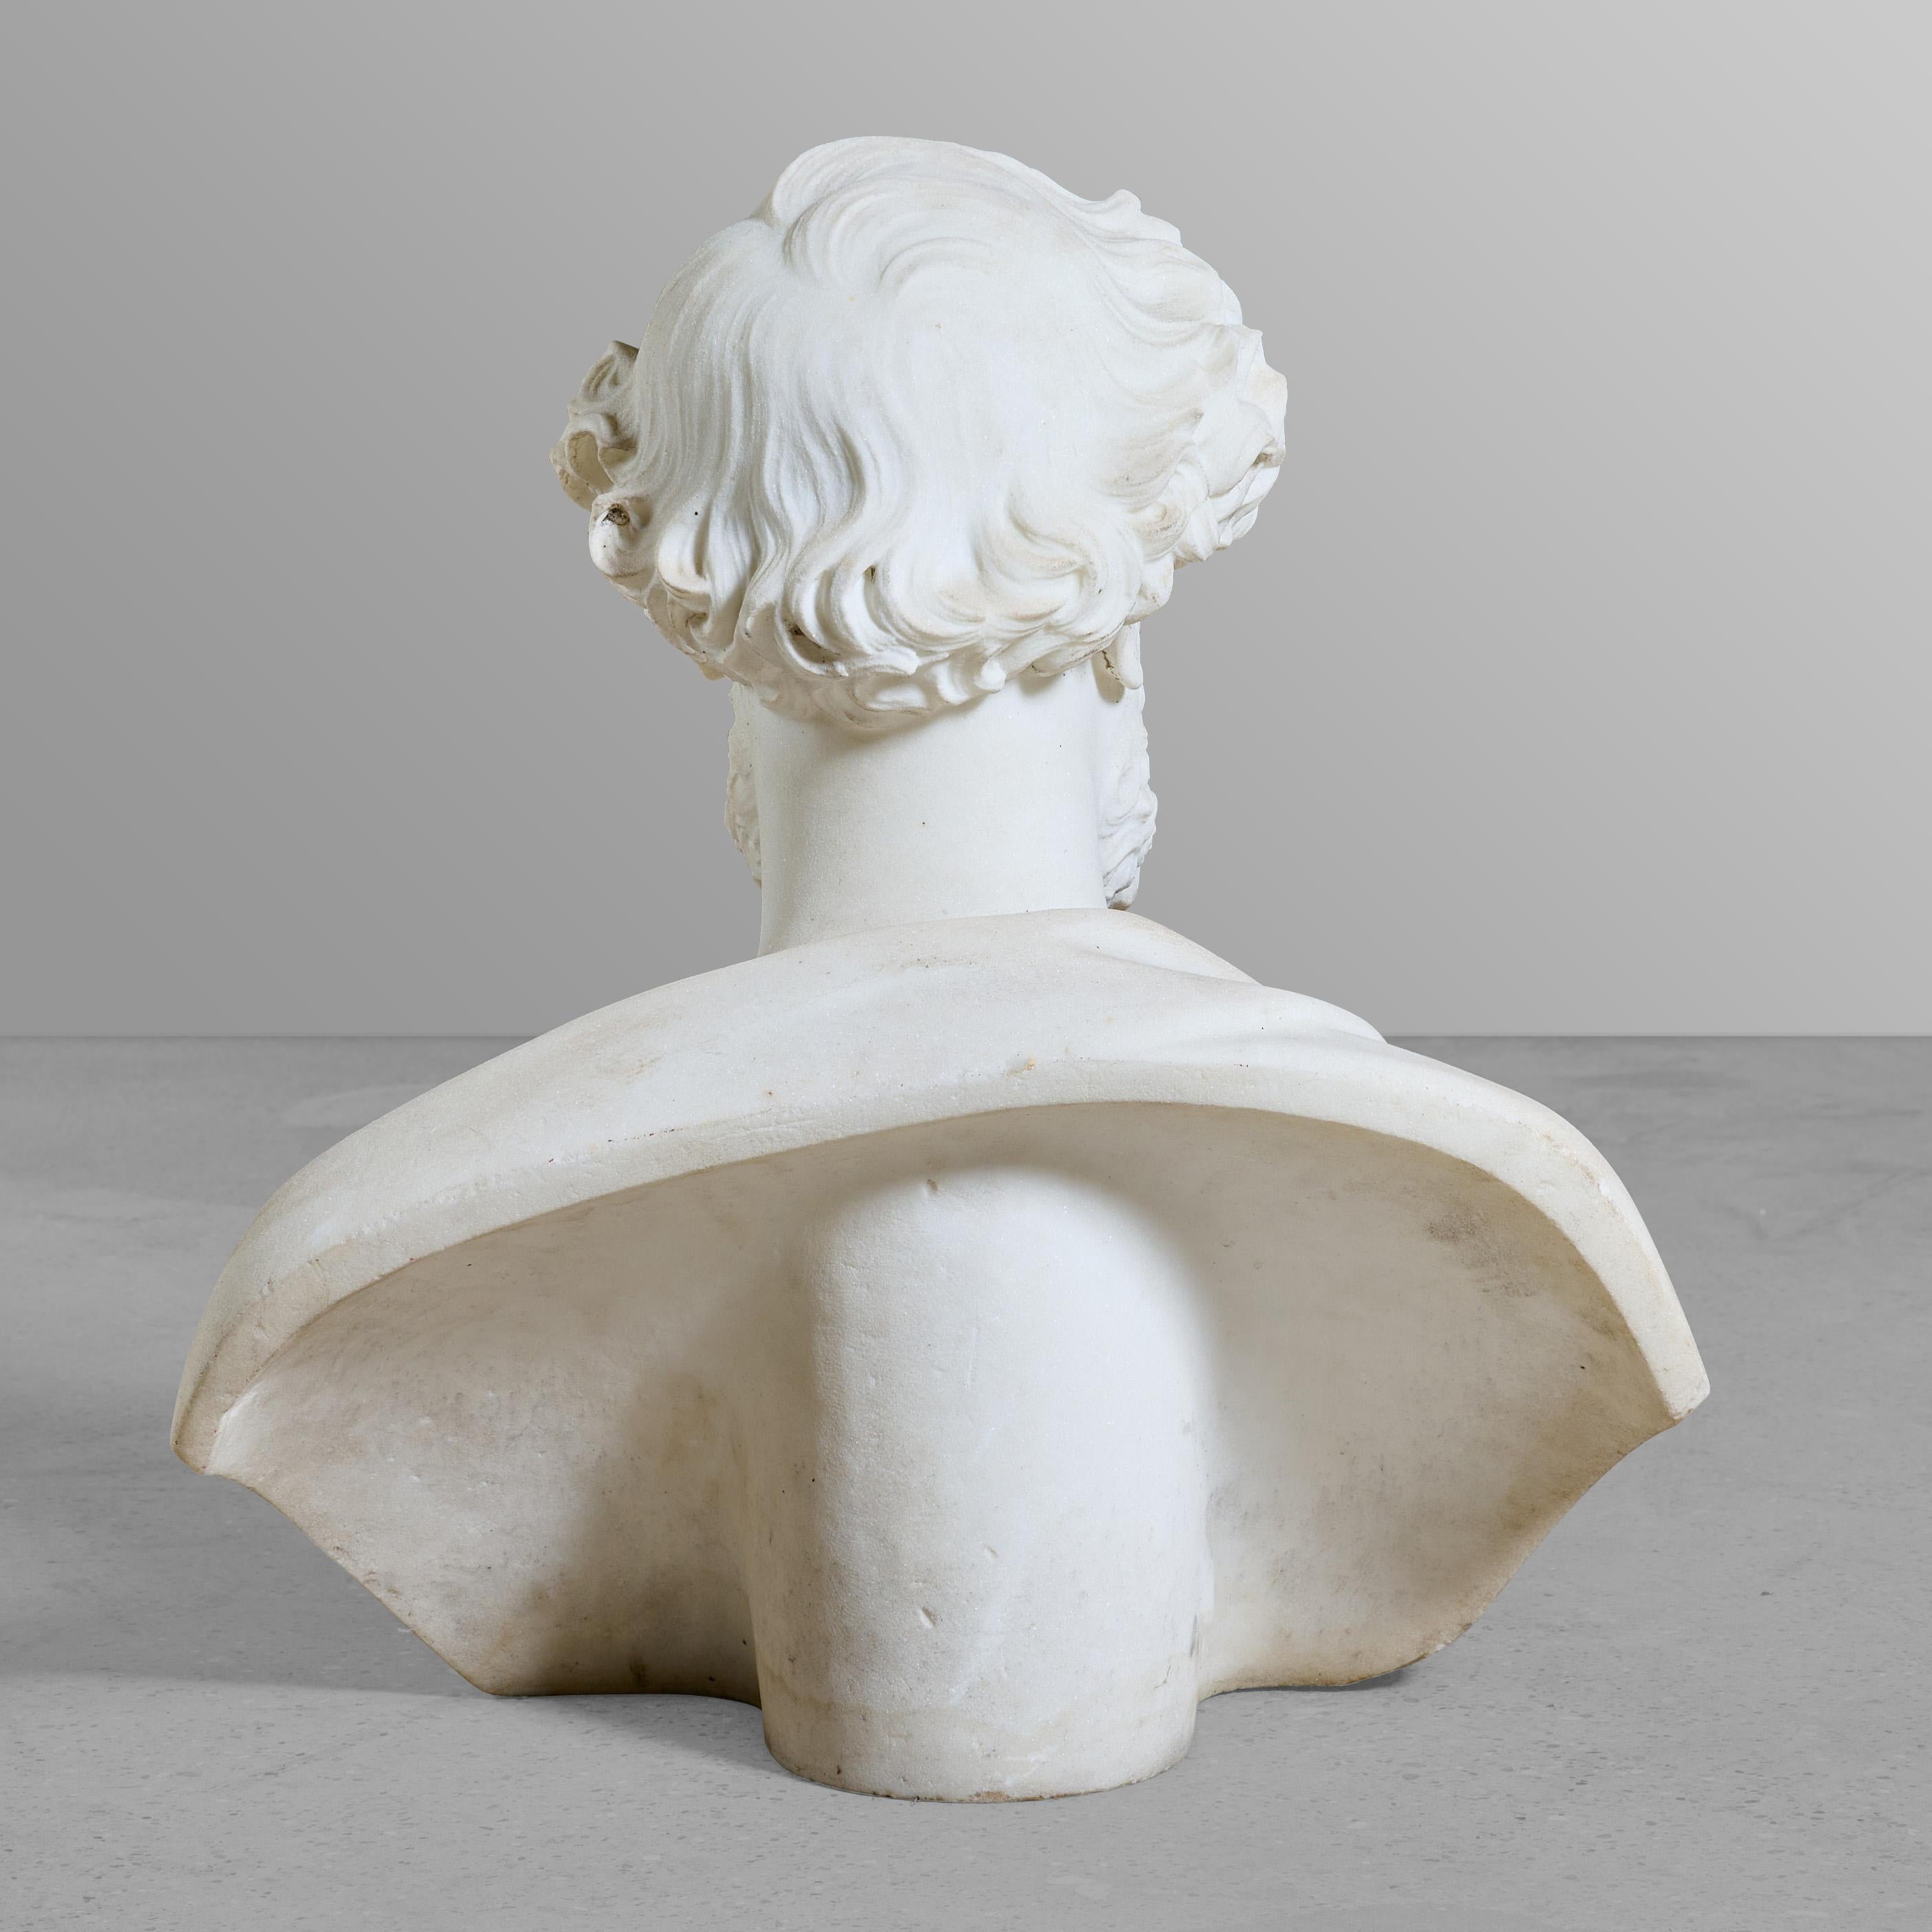 Carrara marble bust of an elder. Fantastic quality marble and carving.